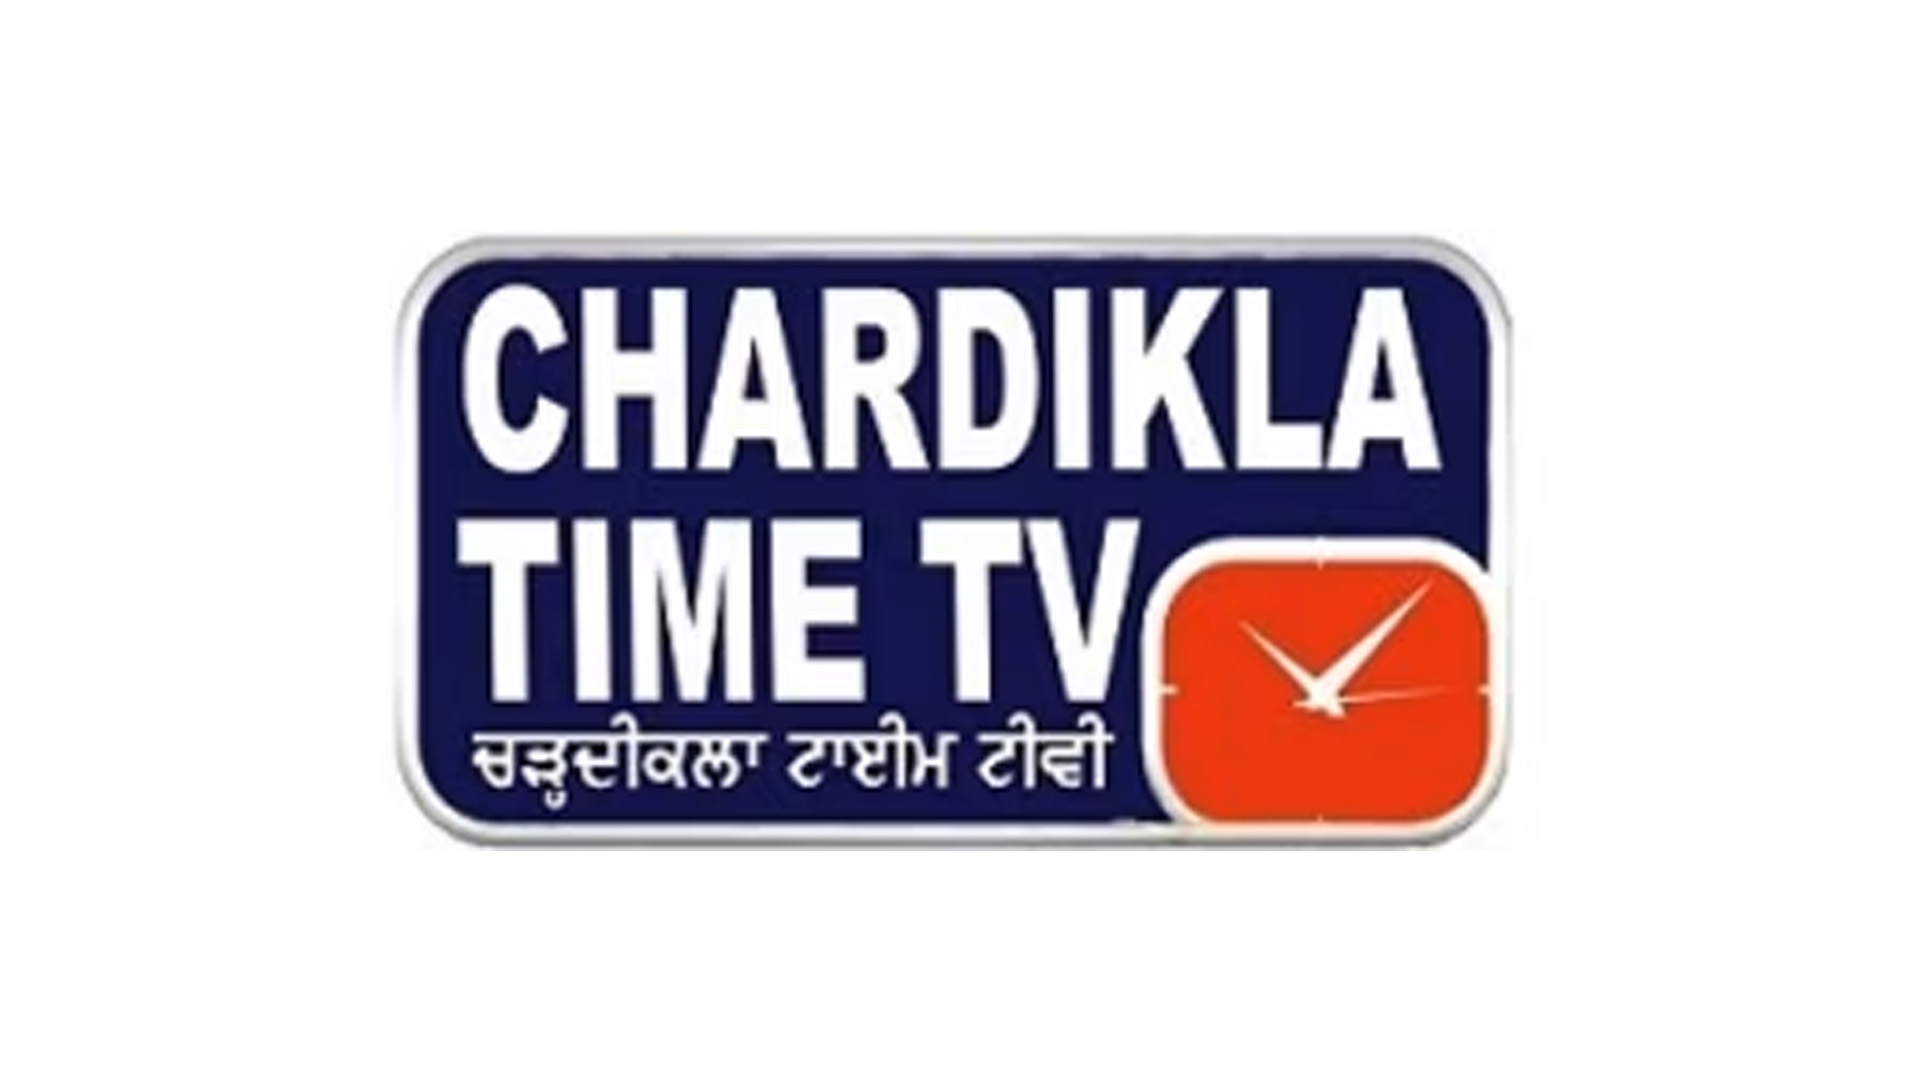 Boost Your Brand with Chardikla Time TV Advertising and Rates